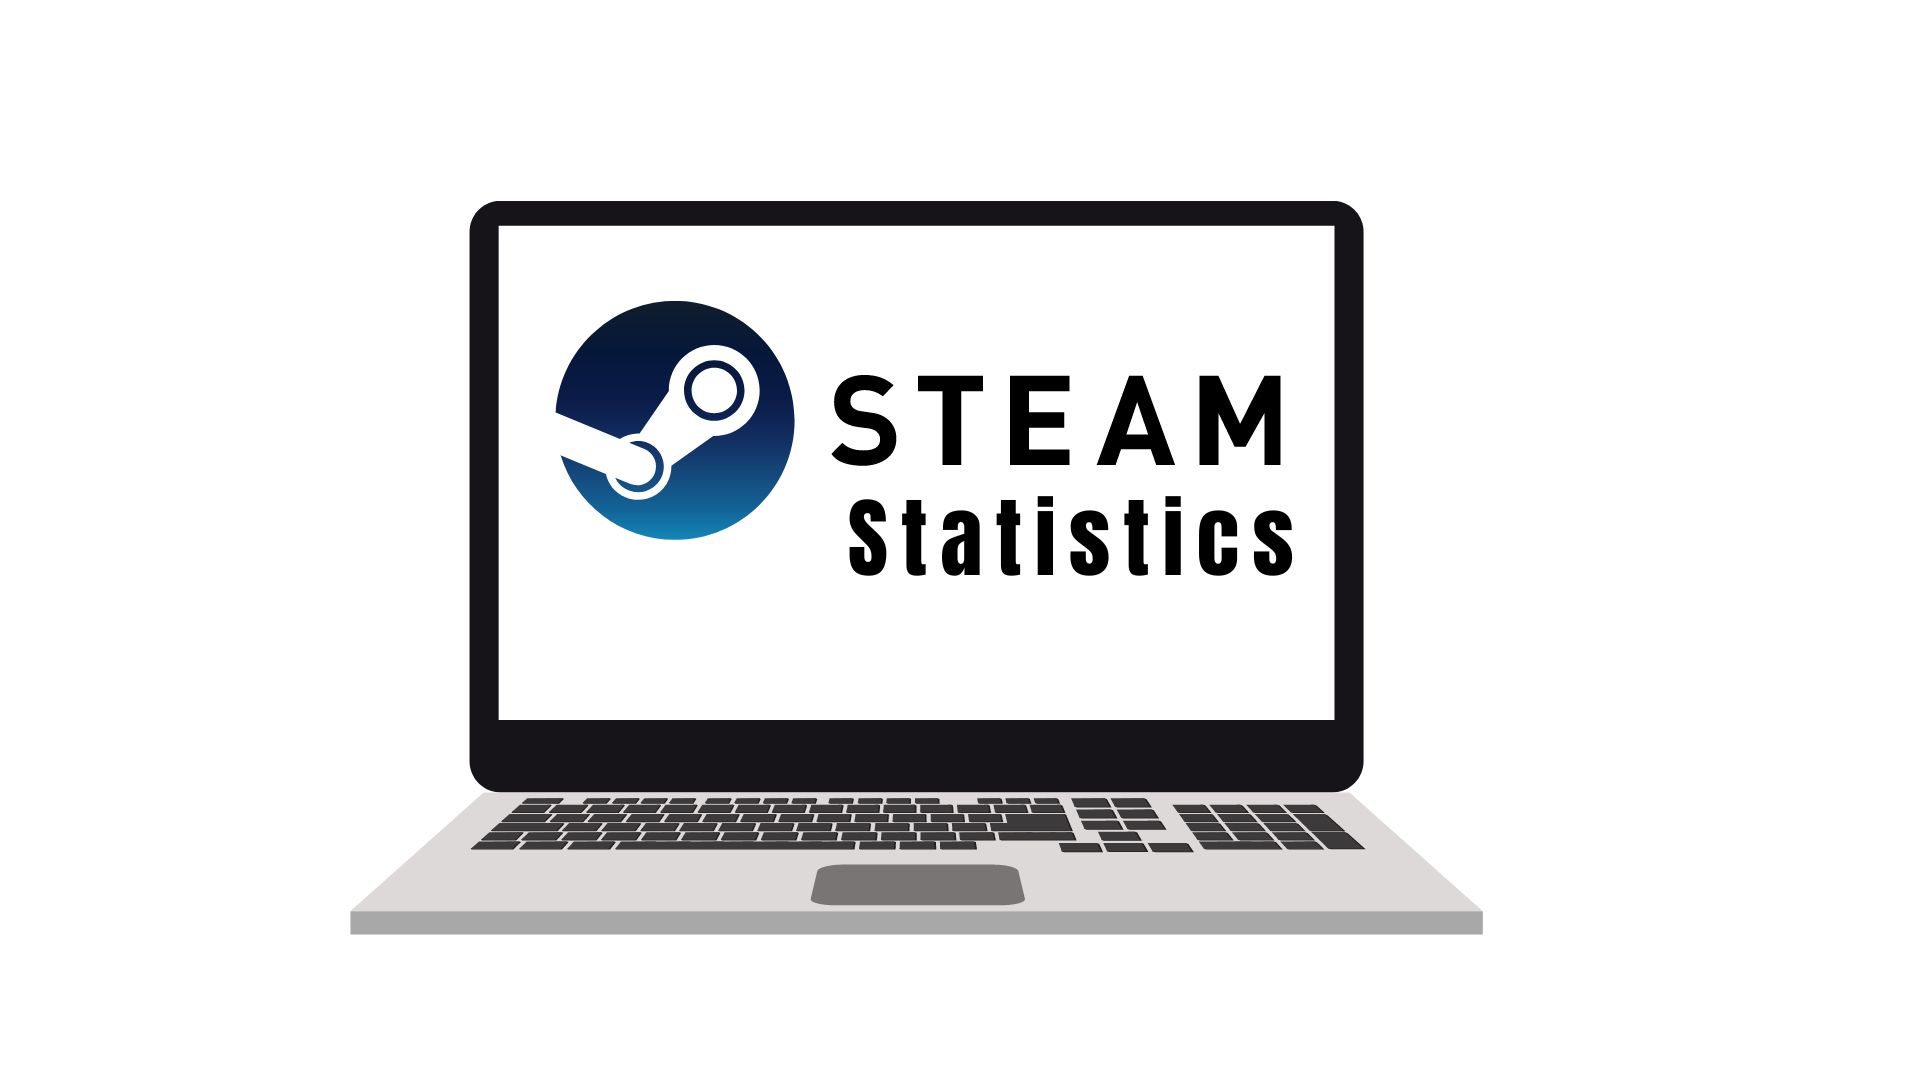 Steam users logged in фото 84